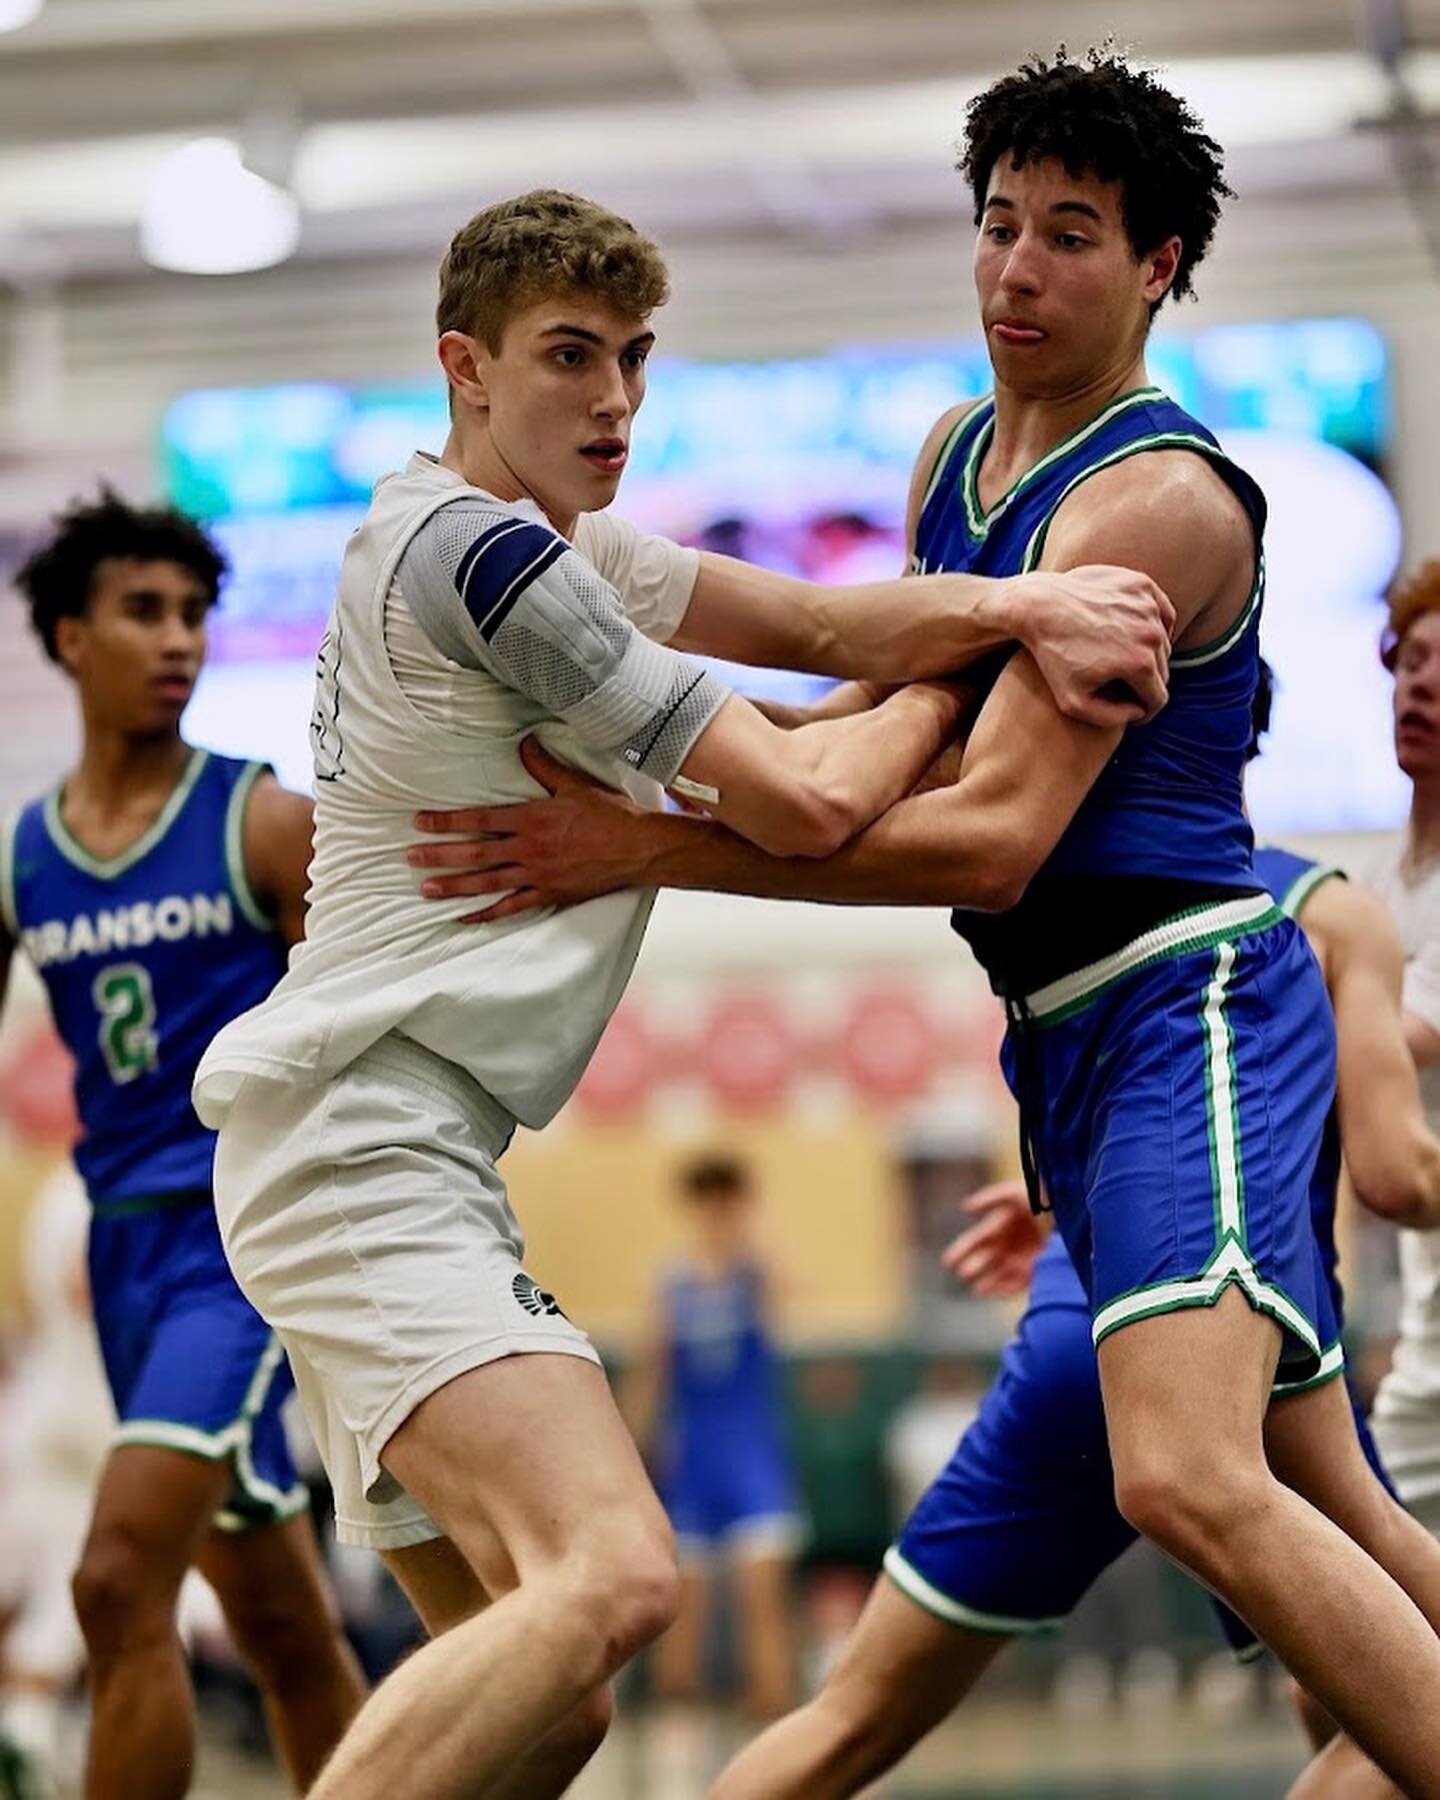 De La Salle holds off the Branson Bulls 62-54 to survive and advance in the NCS Open Division tournament. The Spartans will face Salesian in Friday&rsquo;s championship at Contra Costa College. #AlecBlair led DLS with 24 points while #SemetriCarr led